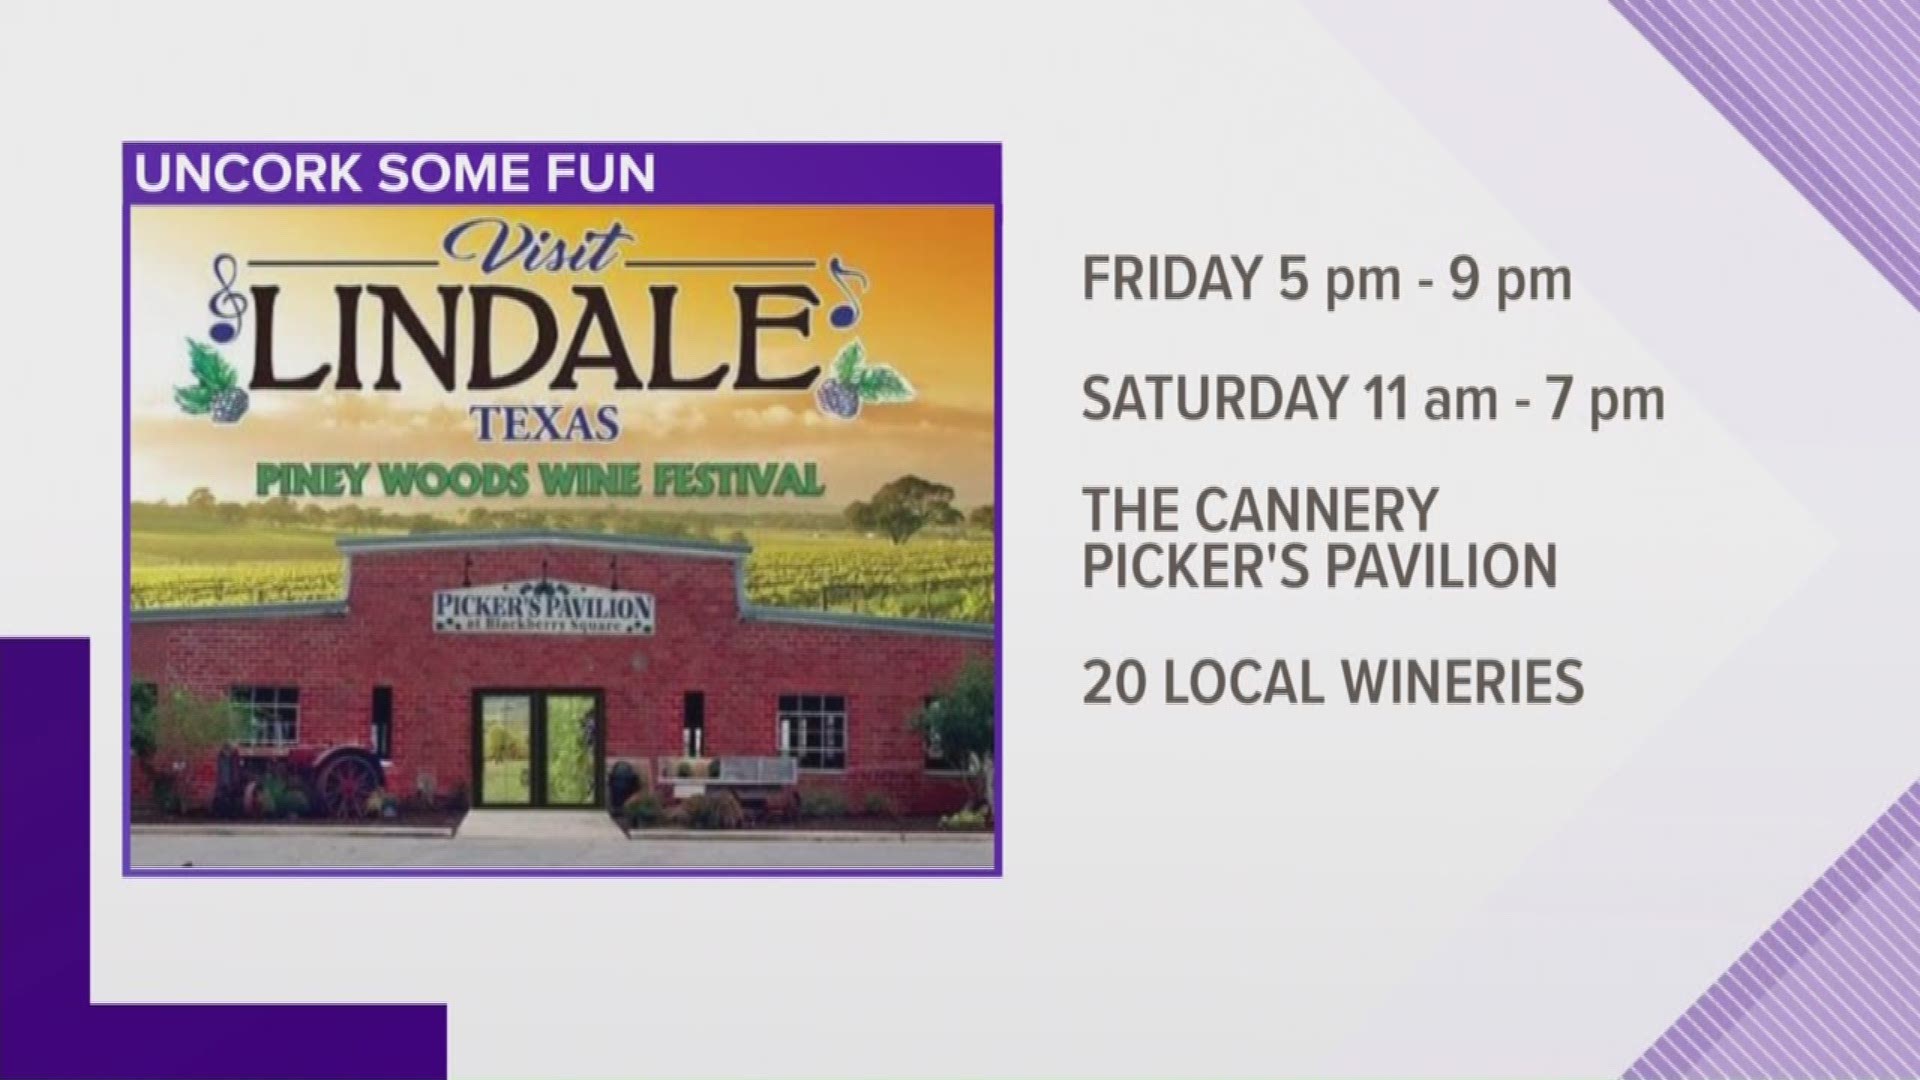 Seong McClauren and Rick Lambert join 19Now to talk about this weekends festival from 11 a.m.-7 p.m., in Lindale.